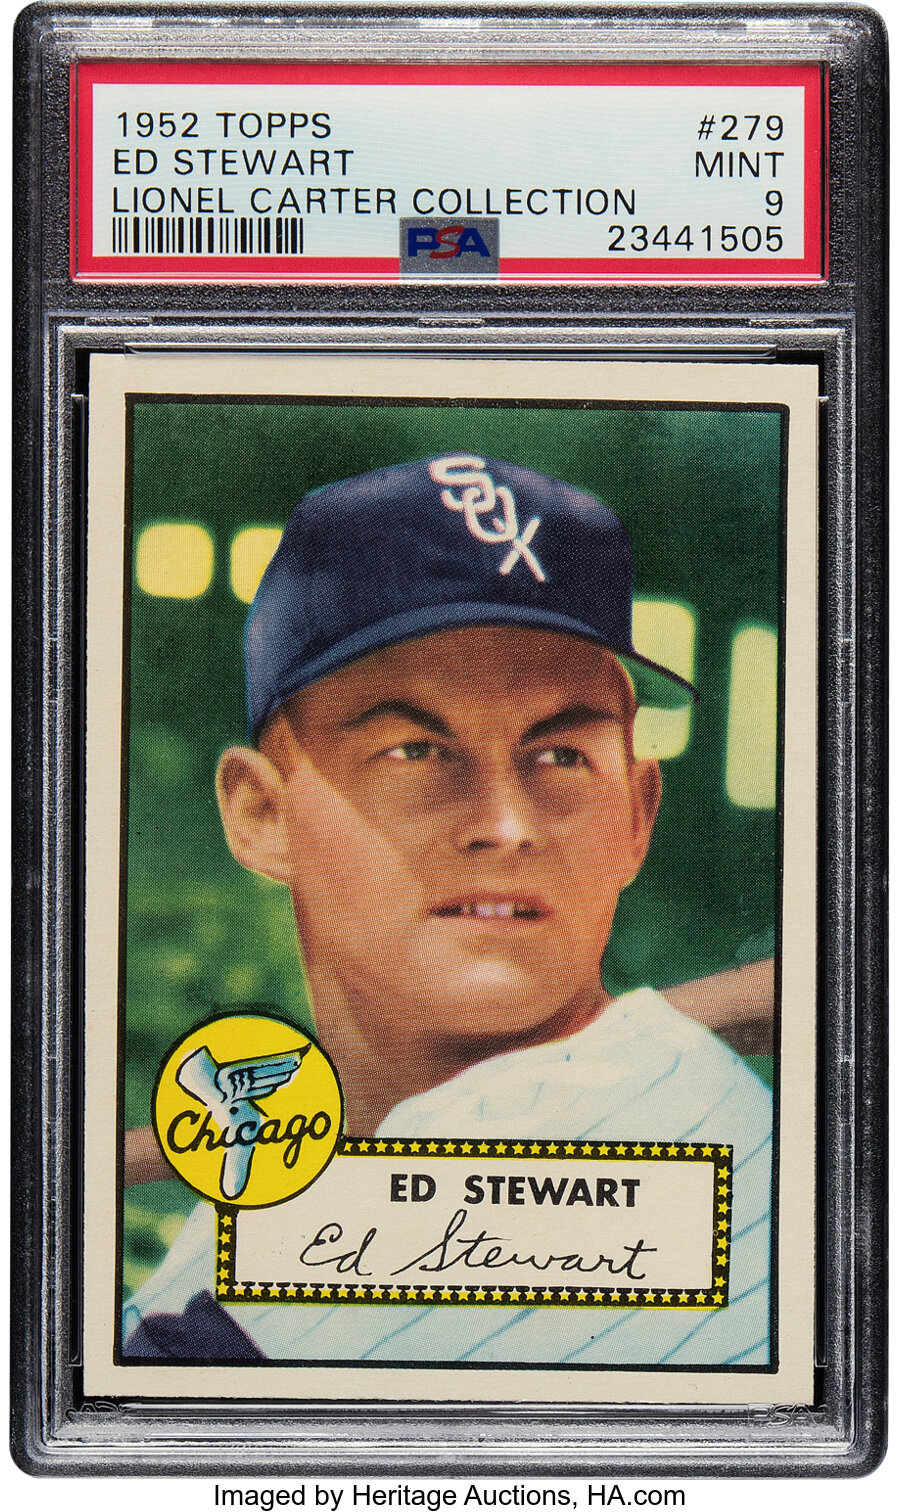 1952 Topps Ed Stewart #279 PSA Mint 9 - Pop Six, One Higher! From the Lionel Carter Collection